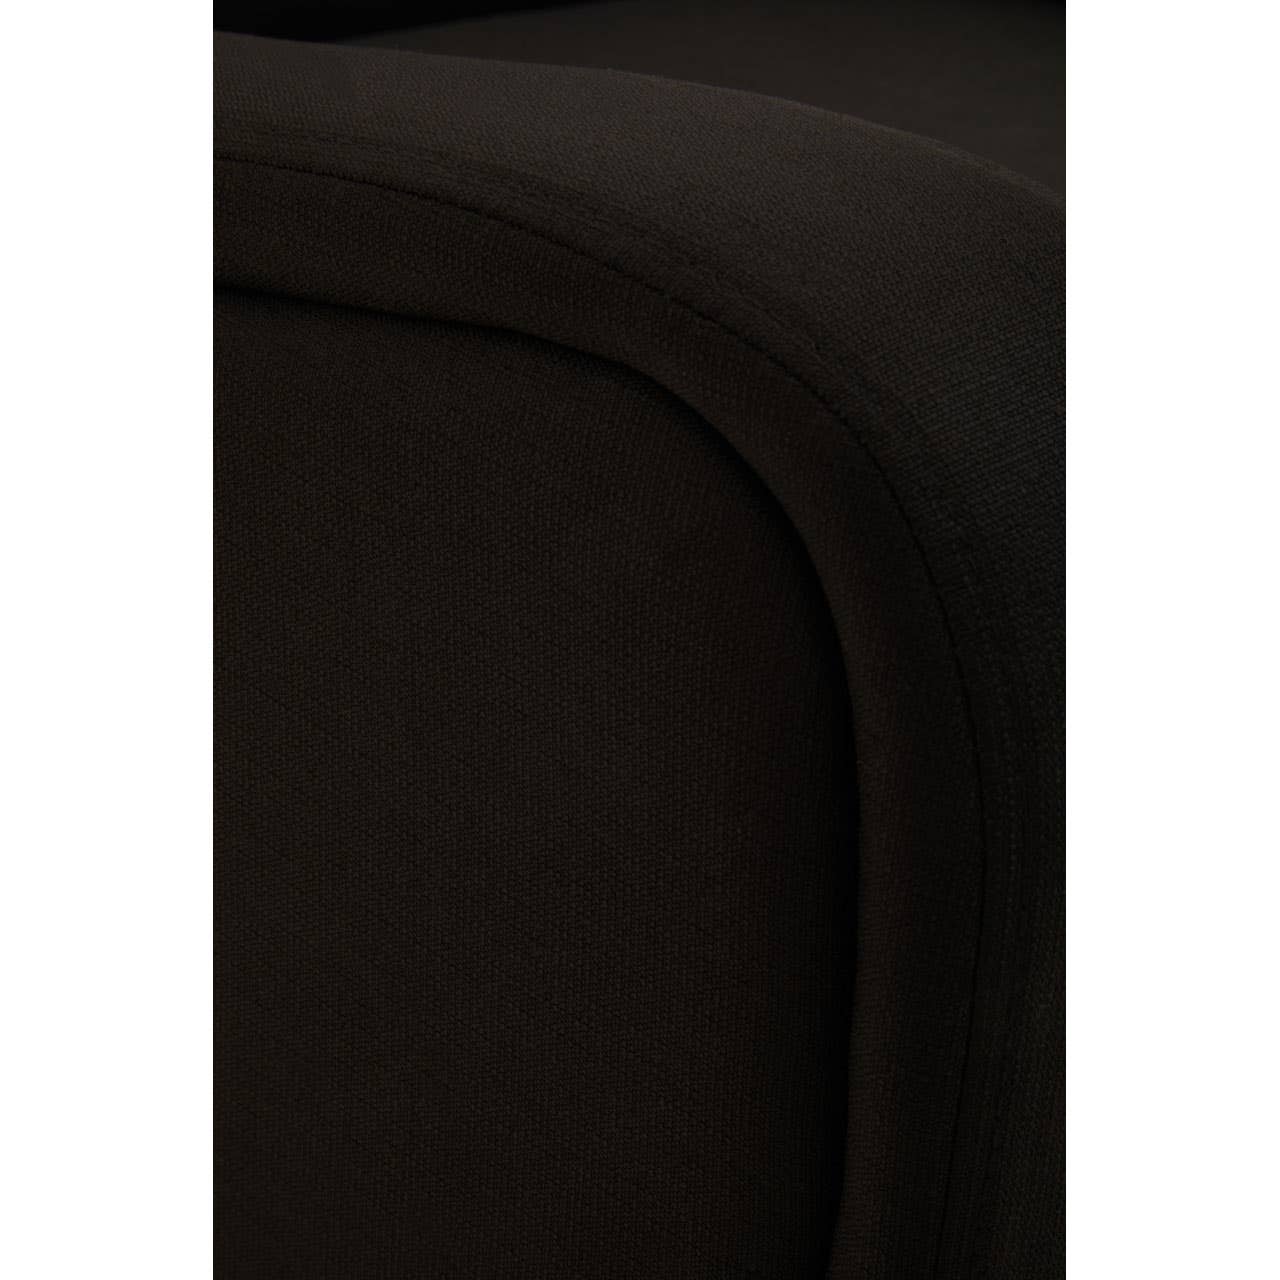 Noosa & Co. Living Holli Black Armchair House of Isabella UK